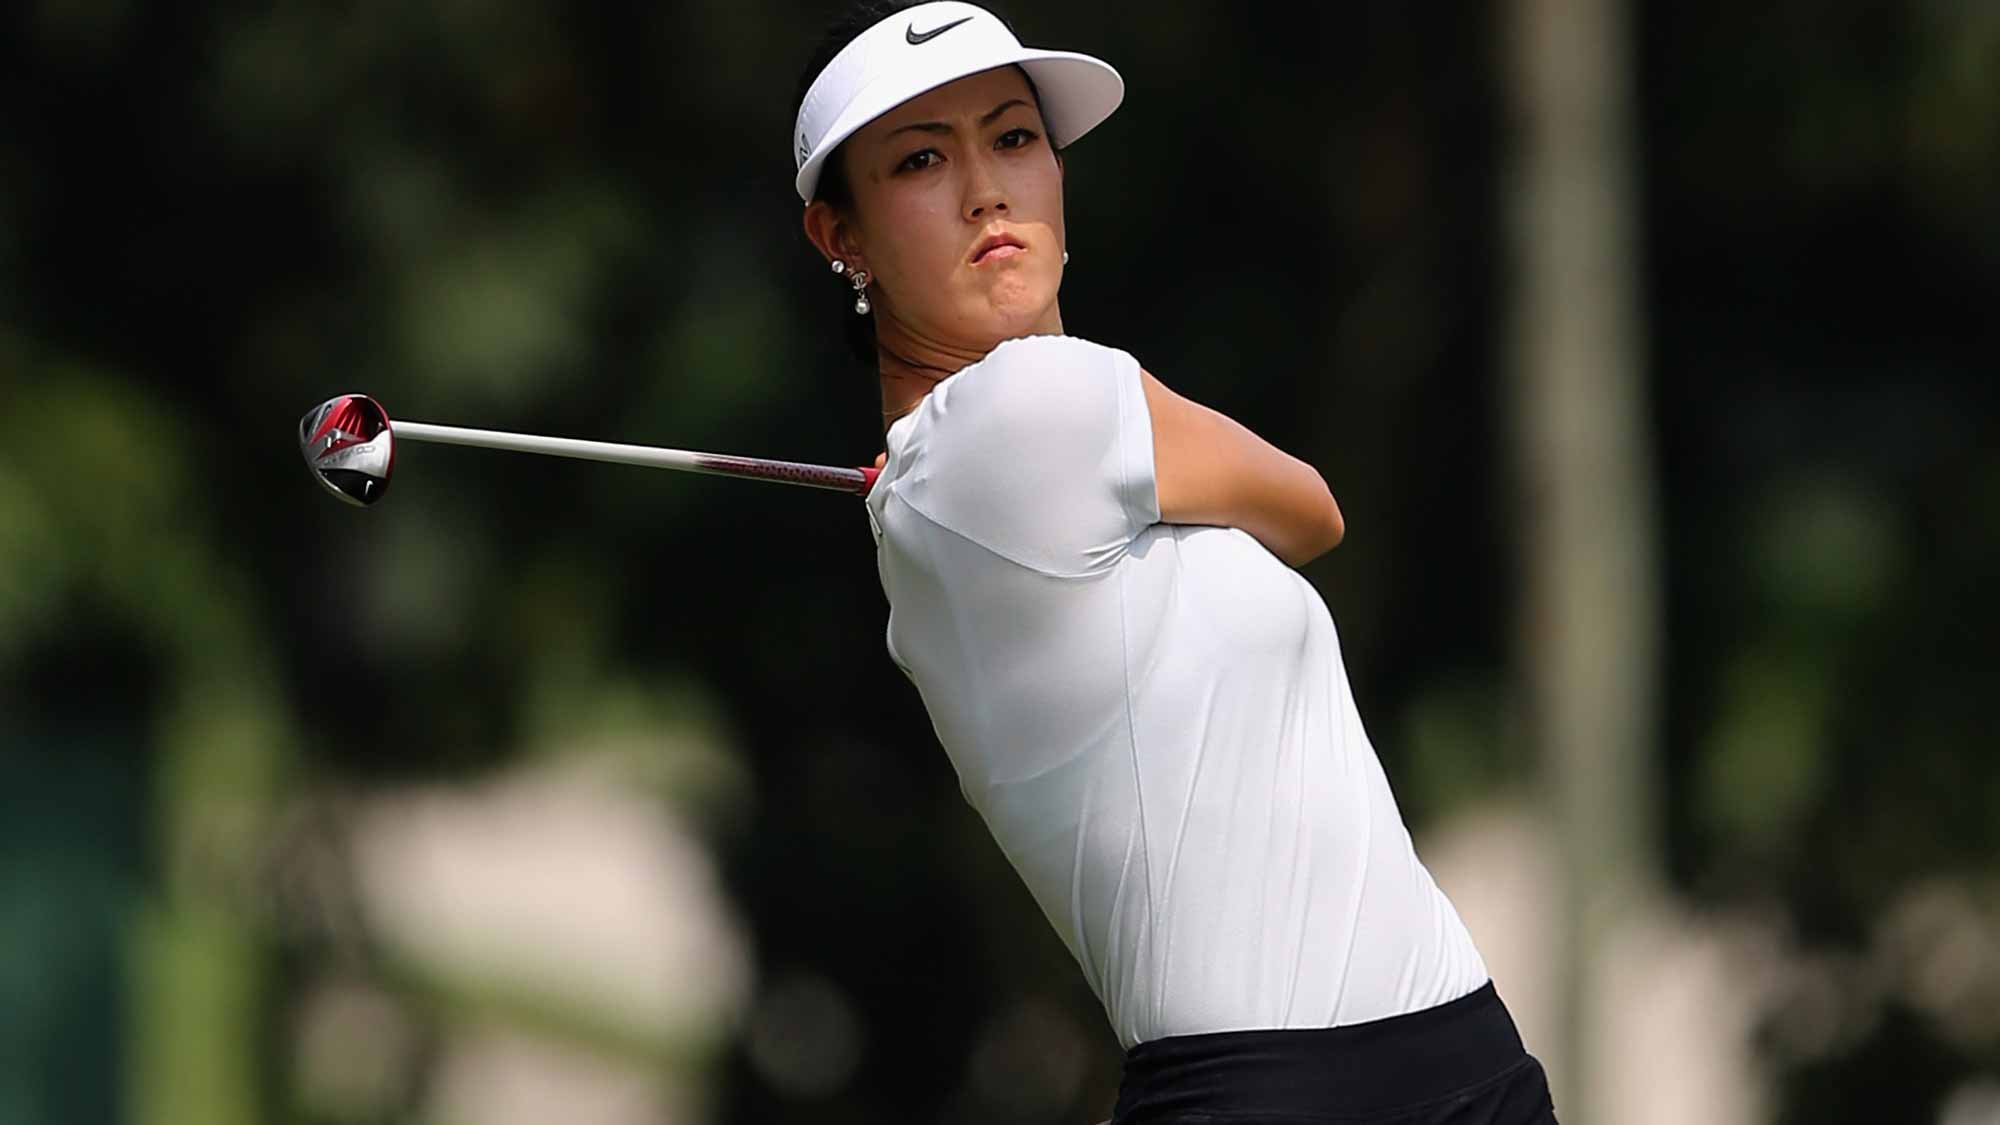 Michelle Wie of USA plays her 2nd shot on the 6th hole during round one of the Sime Darby LPGA Tour at Kuala Lumpur Golf & Country Club 